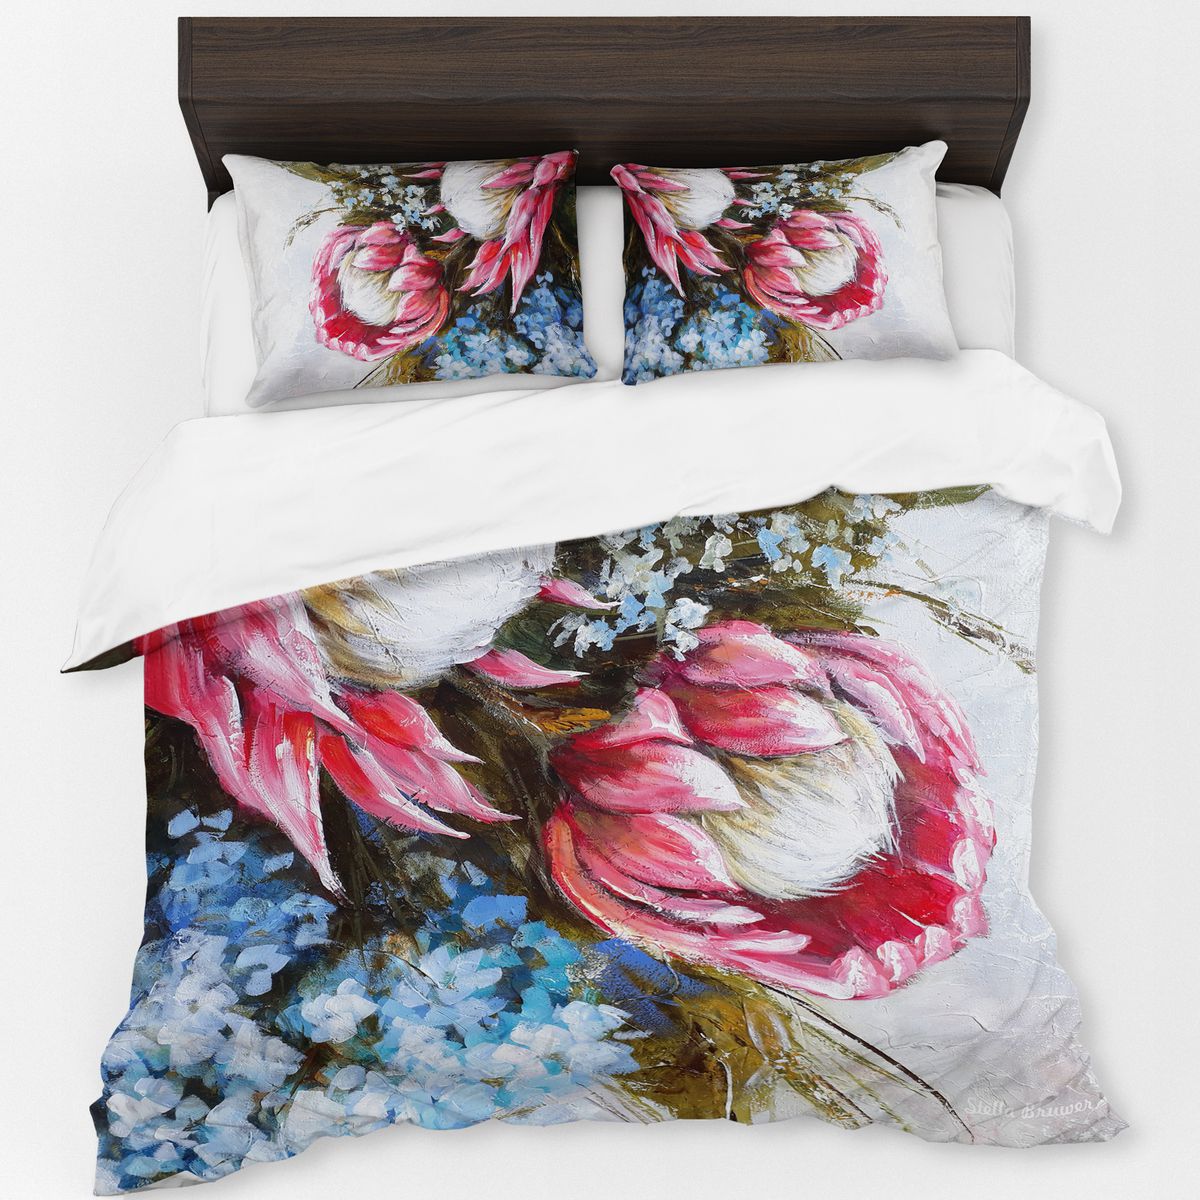 Dripping Blue Protea By Stella Bruwer Duvet Cover Set